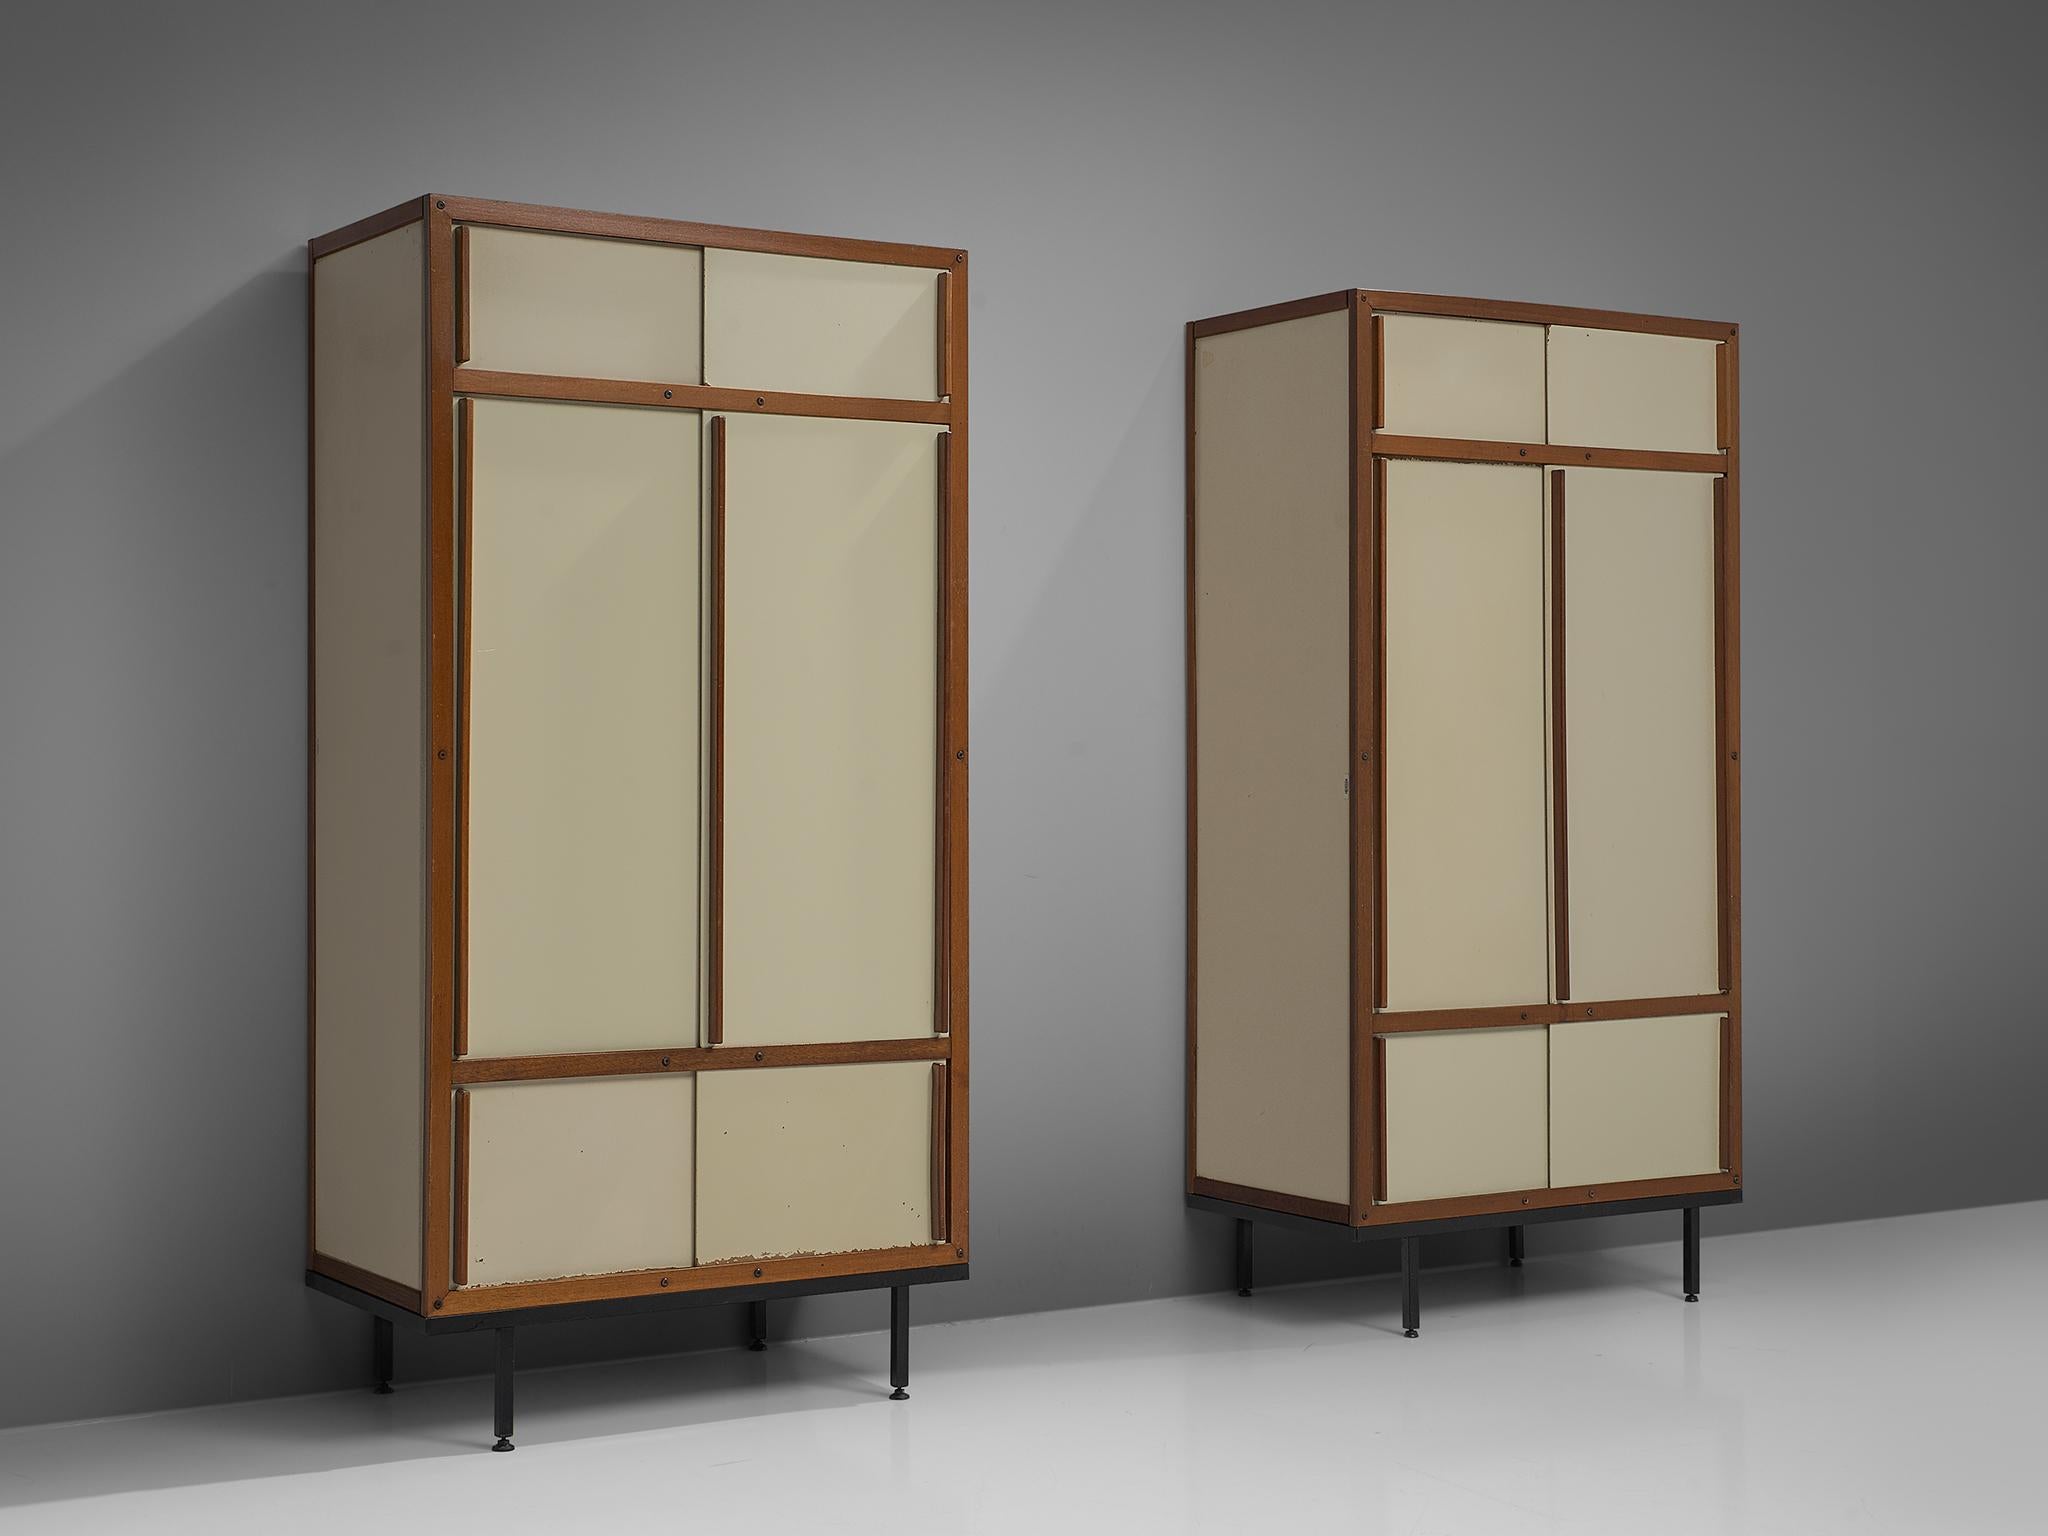 André Sornay for Atelier Sornay, cabinets, honduras mahogany and metal, France, circa 1960.

French midcentury modernist armoires by the Avant Grade creator Andre Sornay. The wooden front panels form a dynamic geometric abstraction in cream